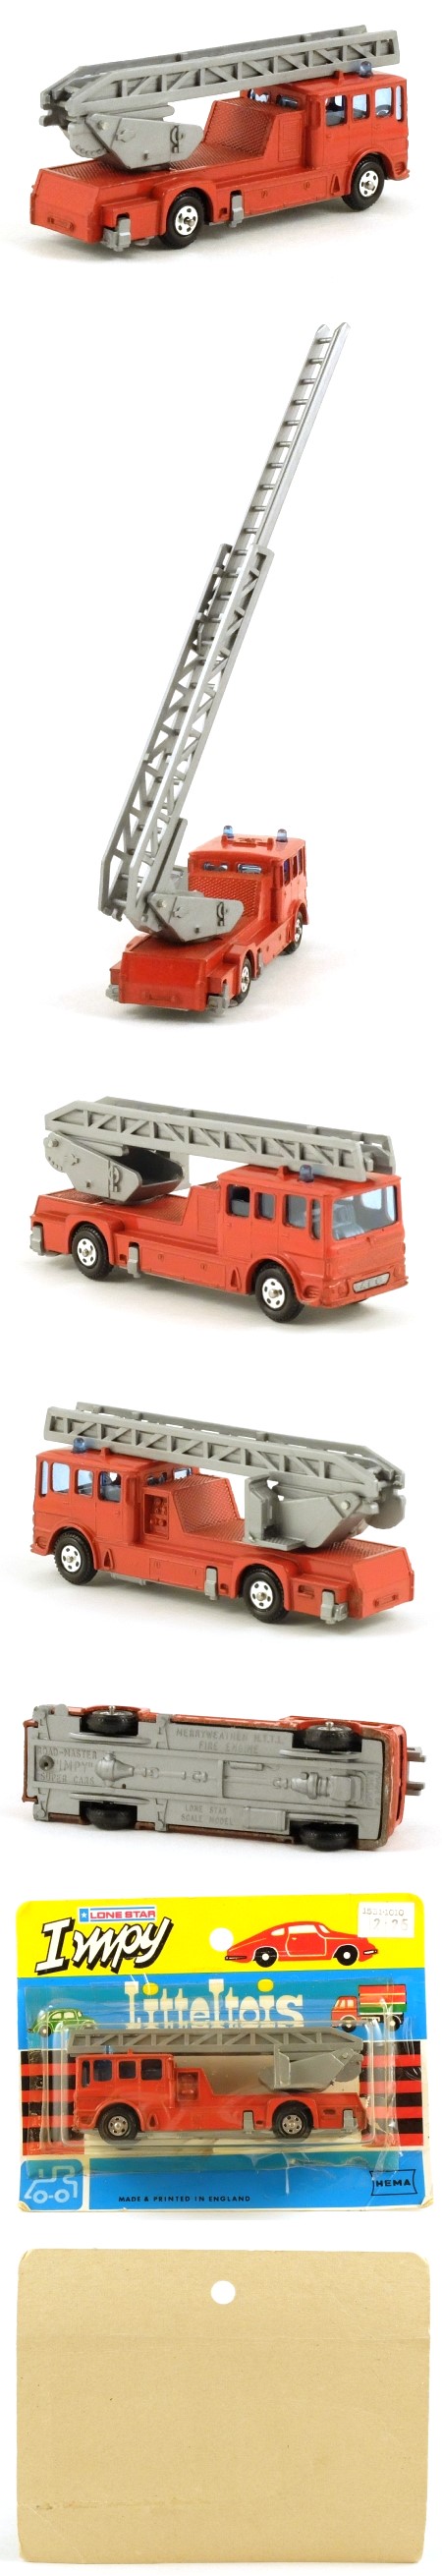 30 AEC Merryweather HTTL Fire Engine